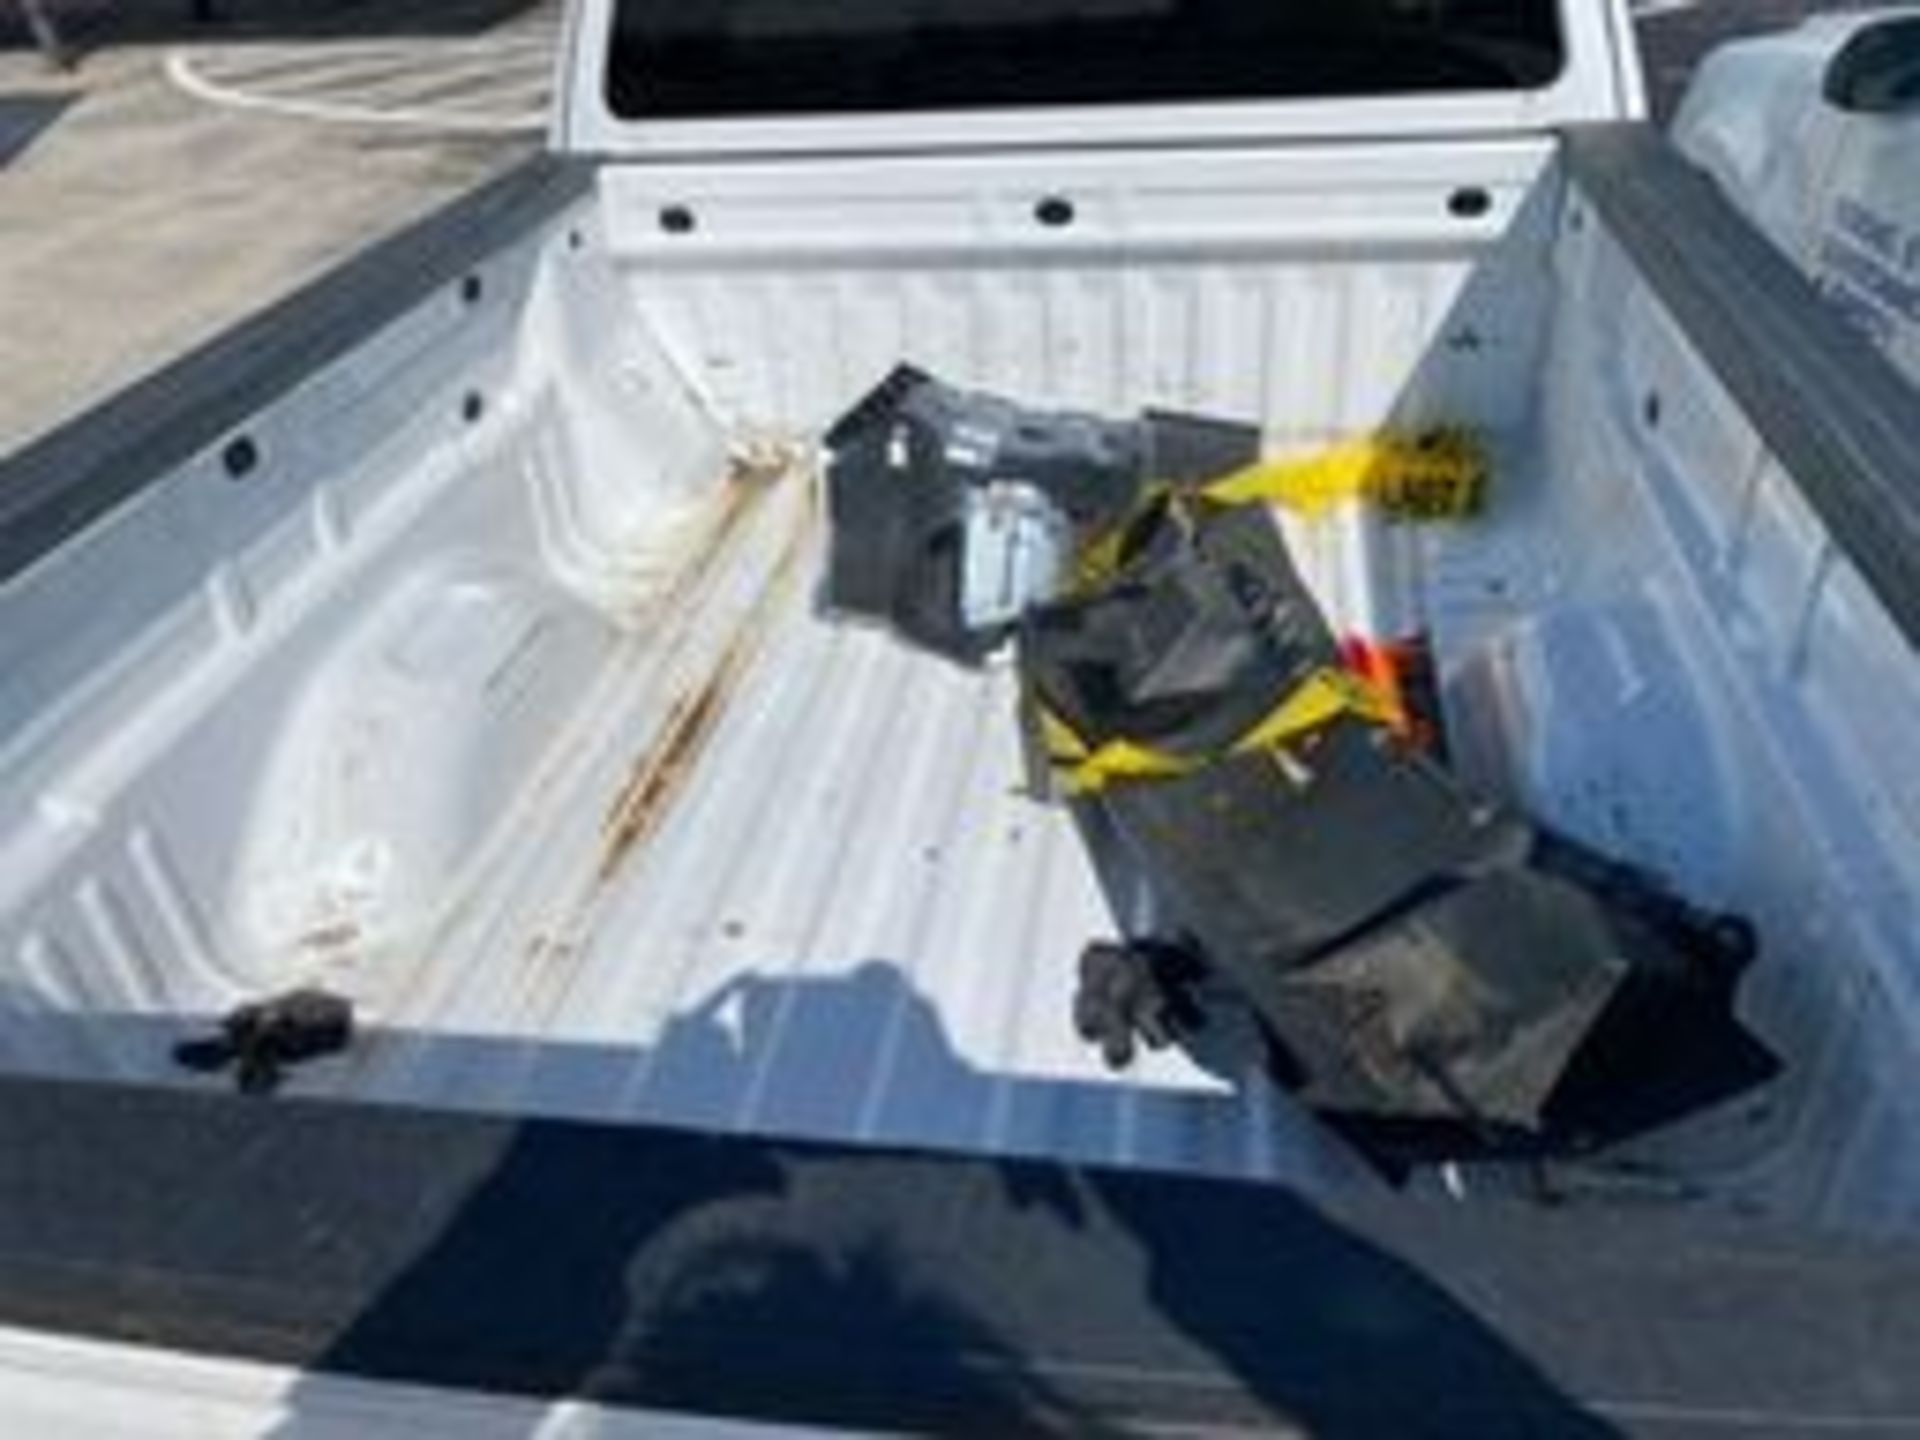 2015 Chevrolet Colorado Pickup Truck (Needs work, recently involved in a collision) - Image 11 of 11